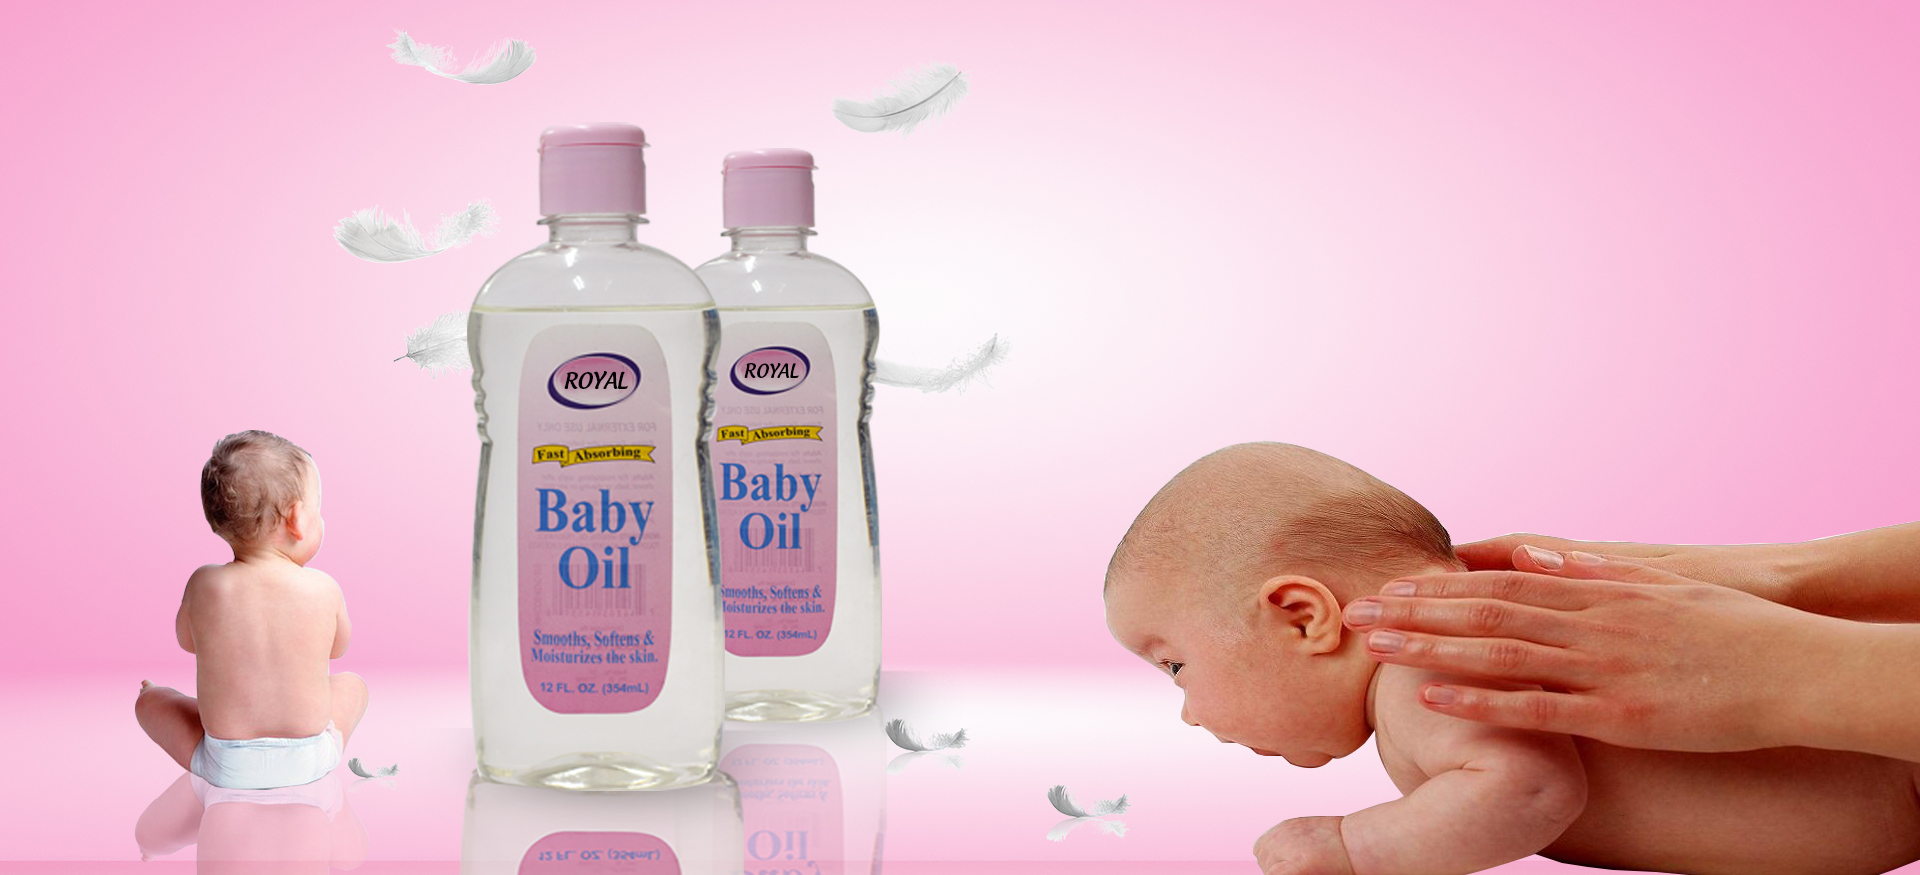 An image featuring a Clear bottle of baby oil from Royal Exports Baby Care Products placed next to a delighted baby, symbolizing tender care and joy